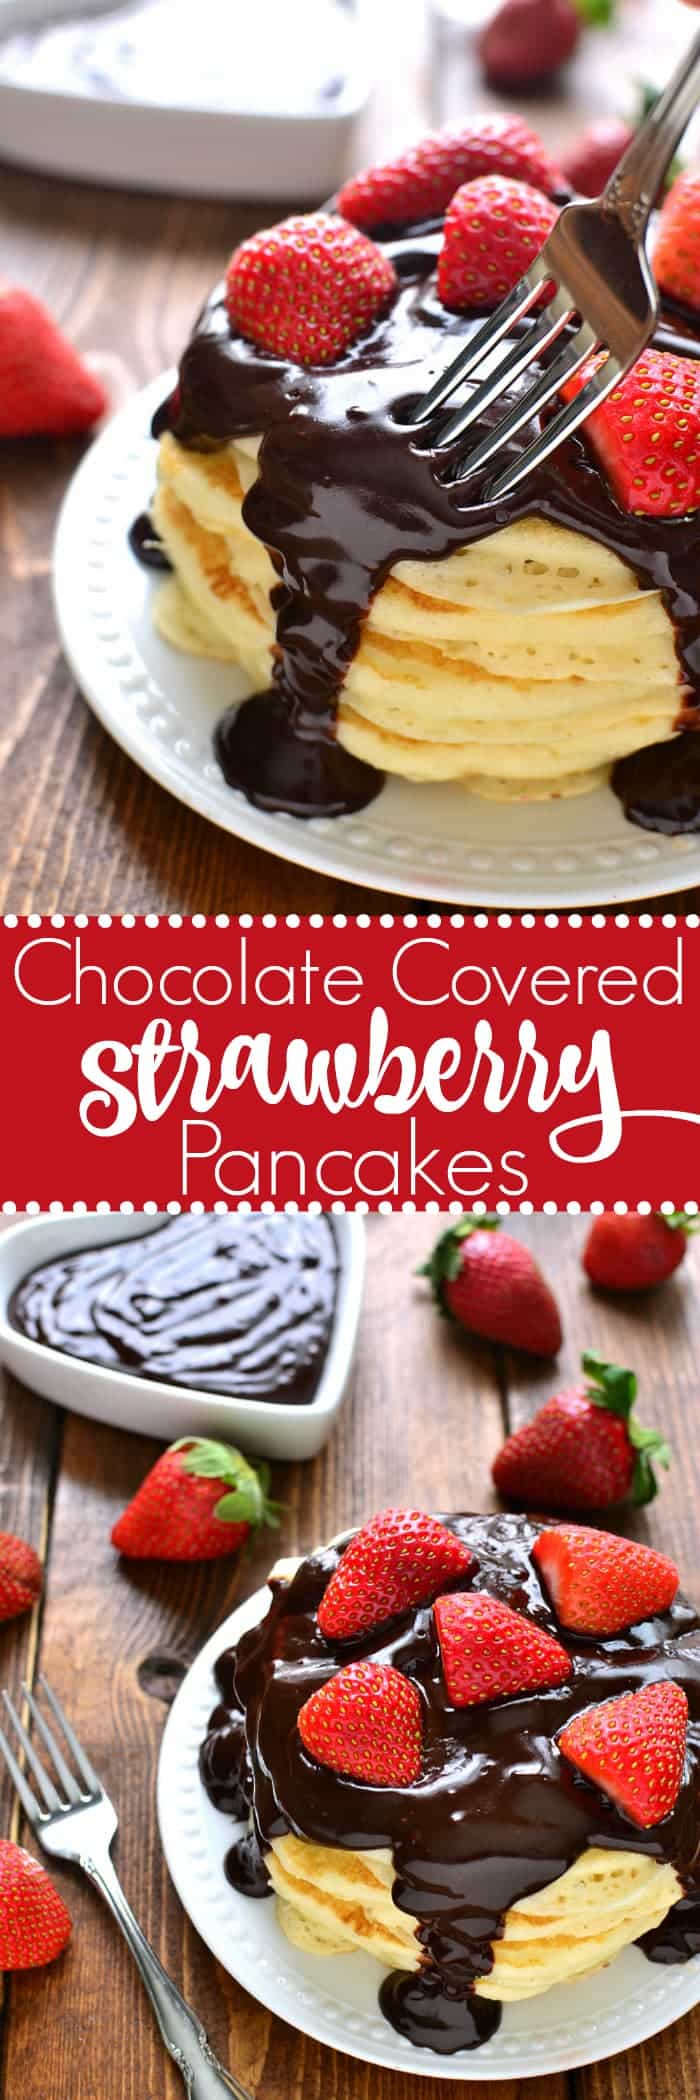  These Chocolate Covered Strawberry Pancakes are light and fluffy, topped with fresh strawberries and rich chocolate ganache. Perfect for Valentine's Day or any special occasion!